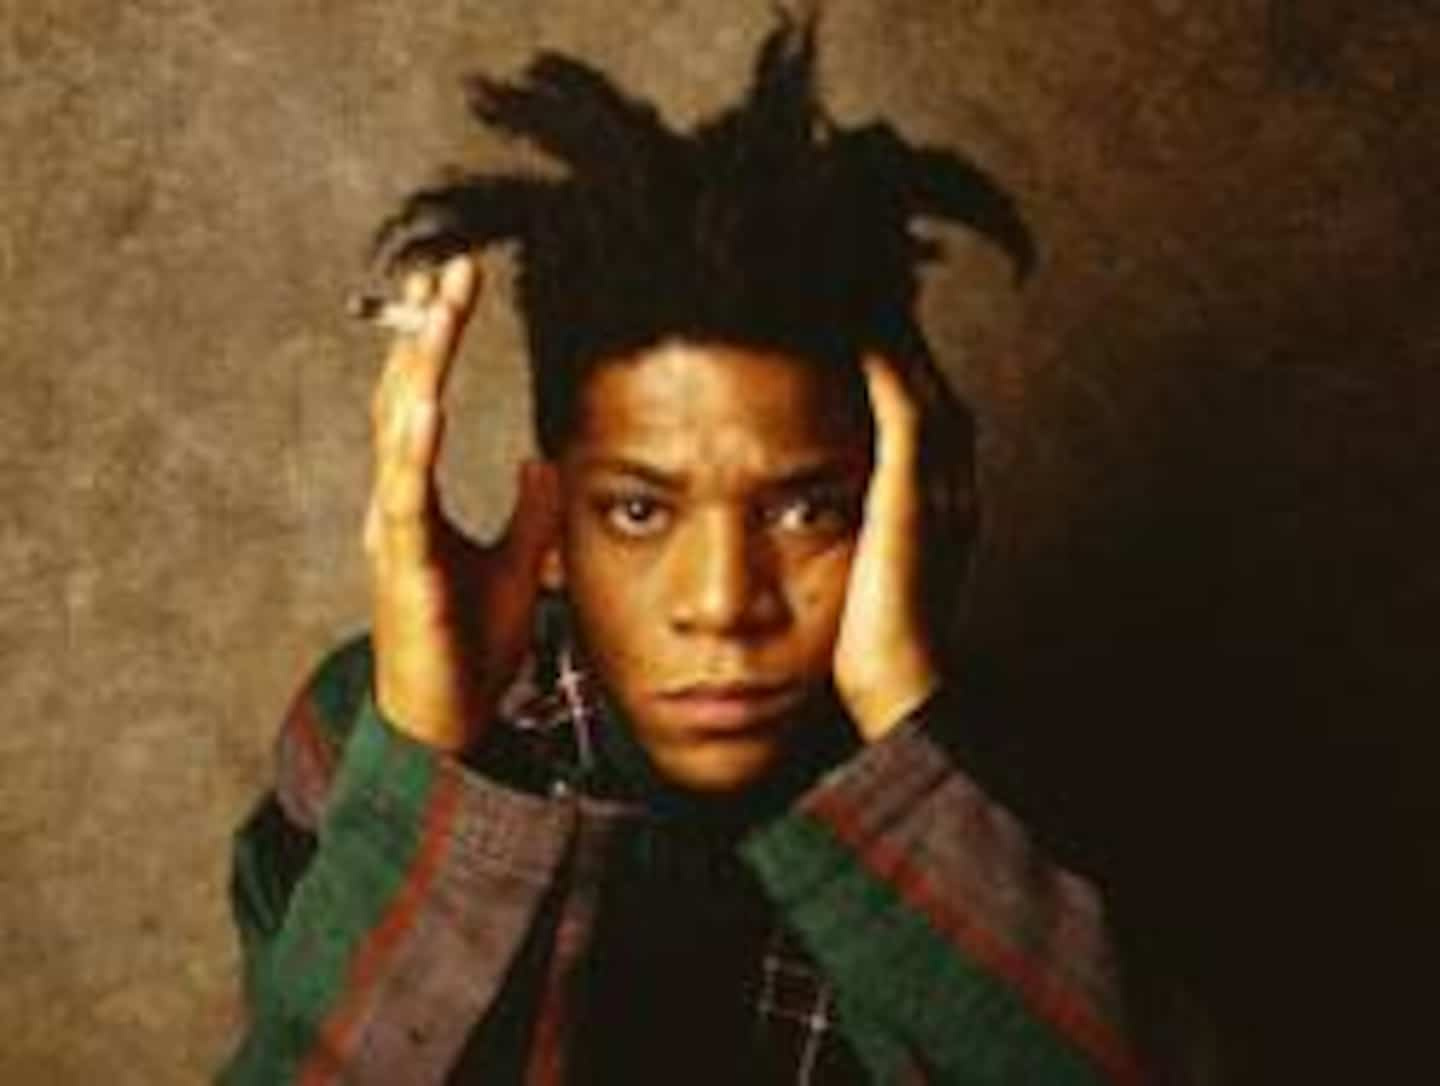 Basquiat or not Basquiat? The FBI seizes 25 works of dubious authenticity